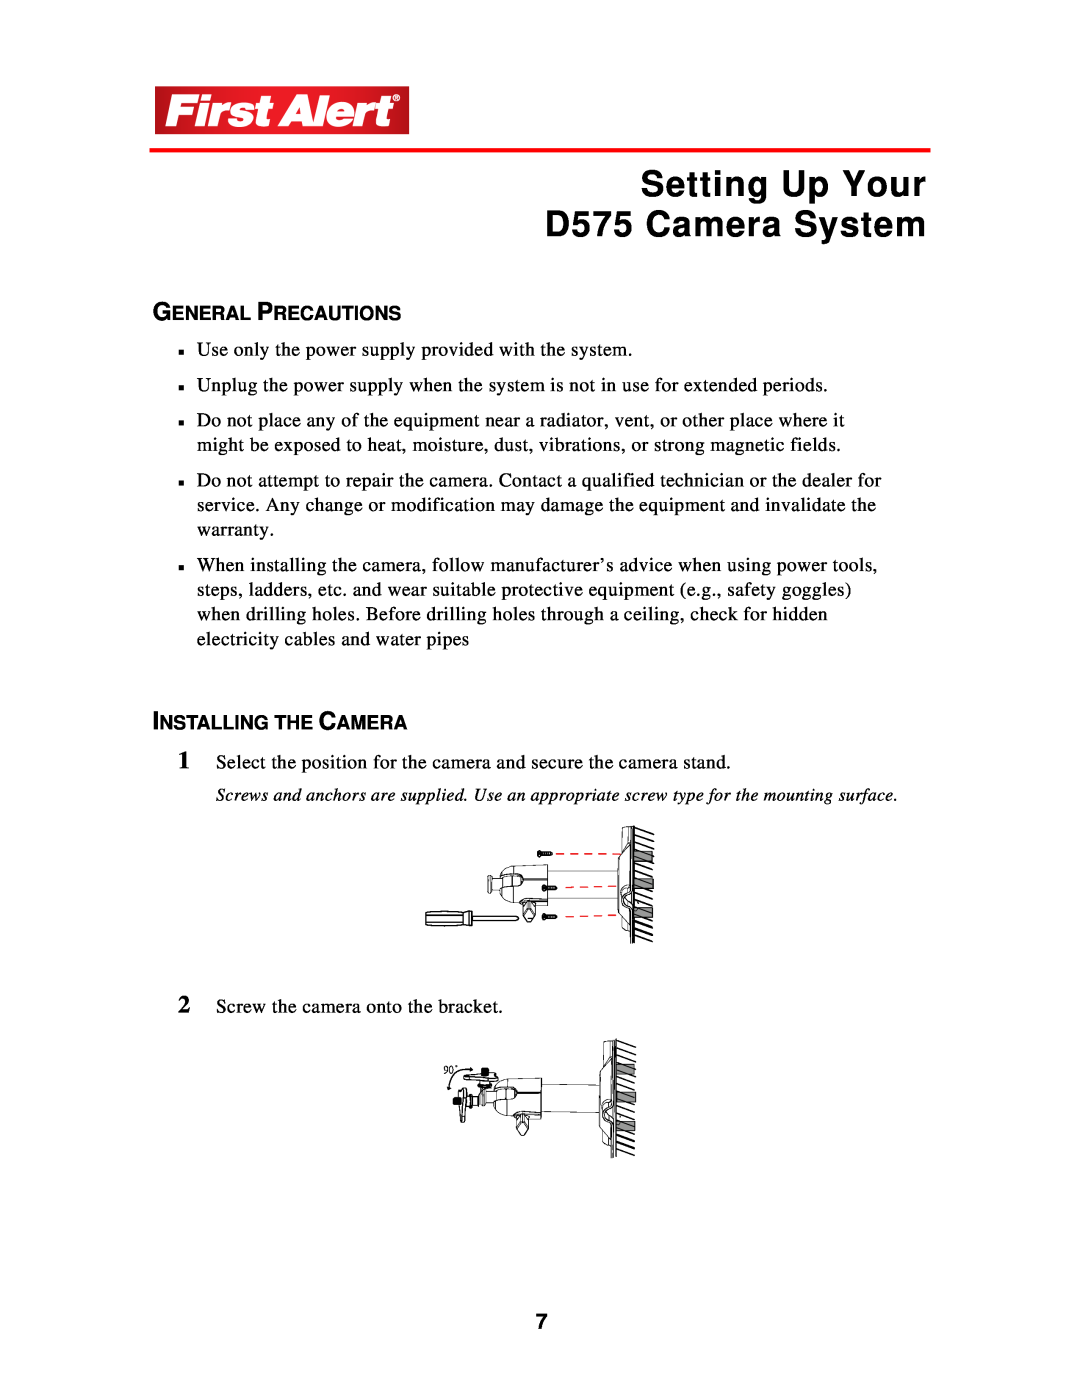 First Alert user manual Setting Up Your D575 Camera System, General Precautions, Installing The Camera 